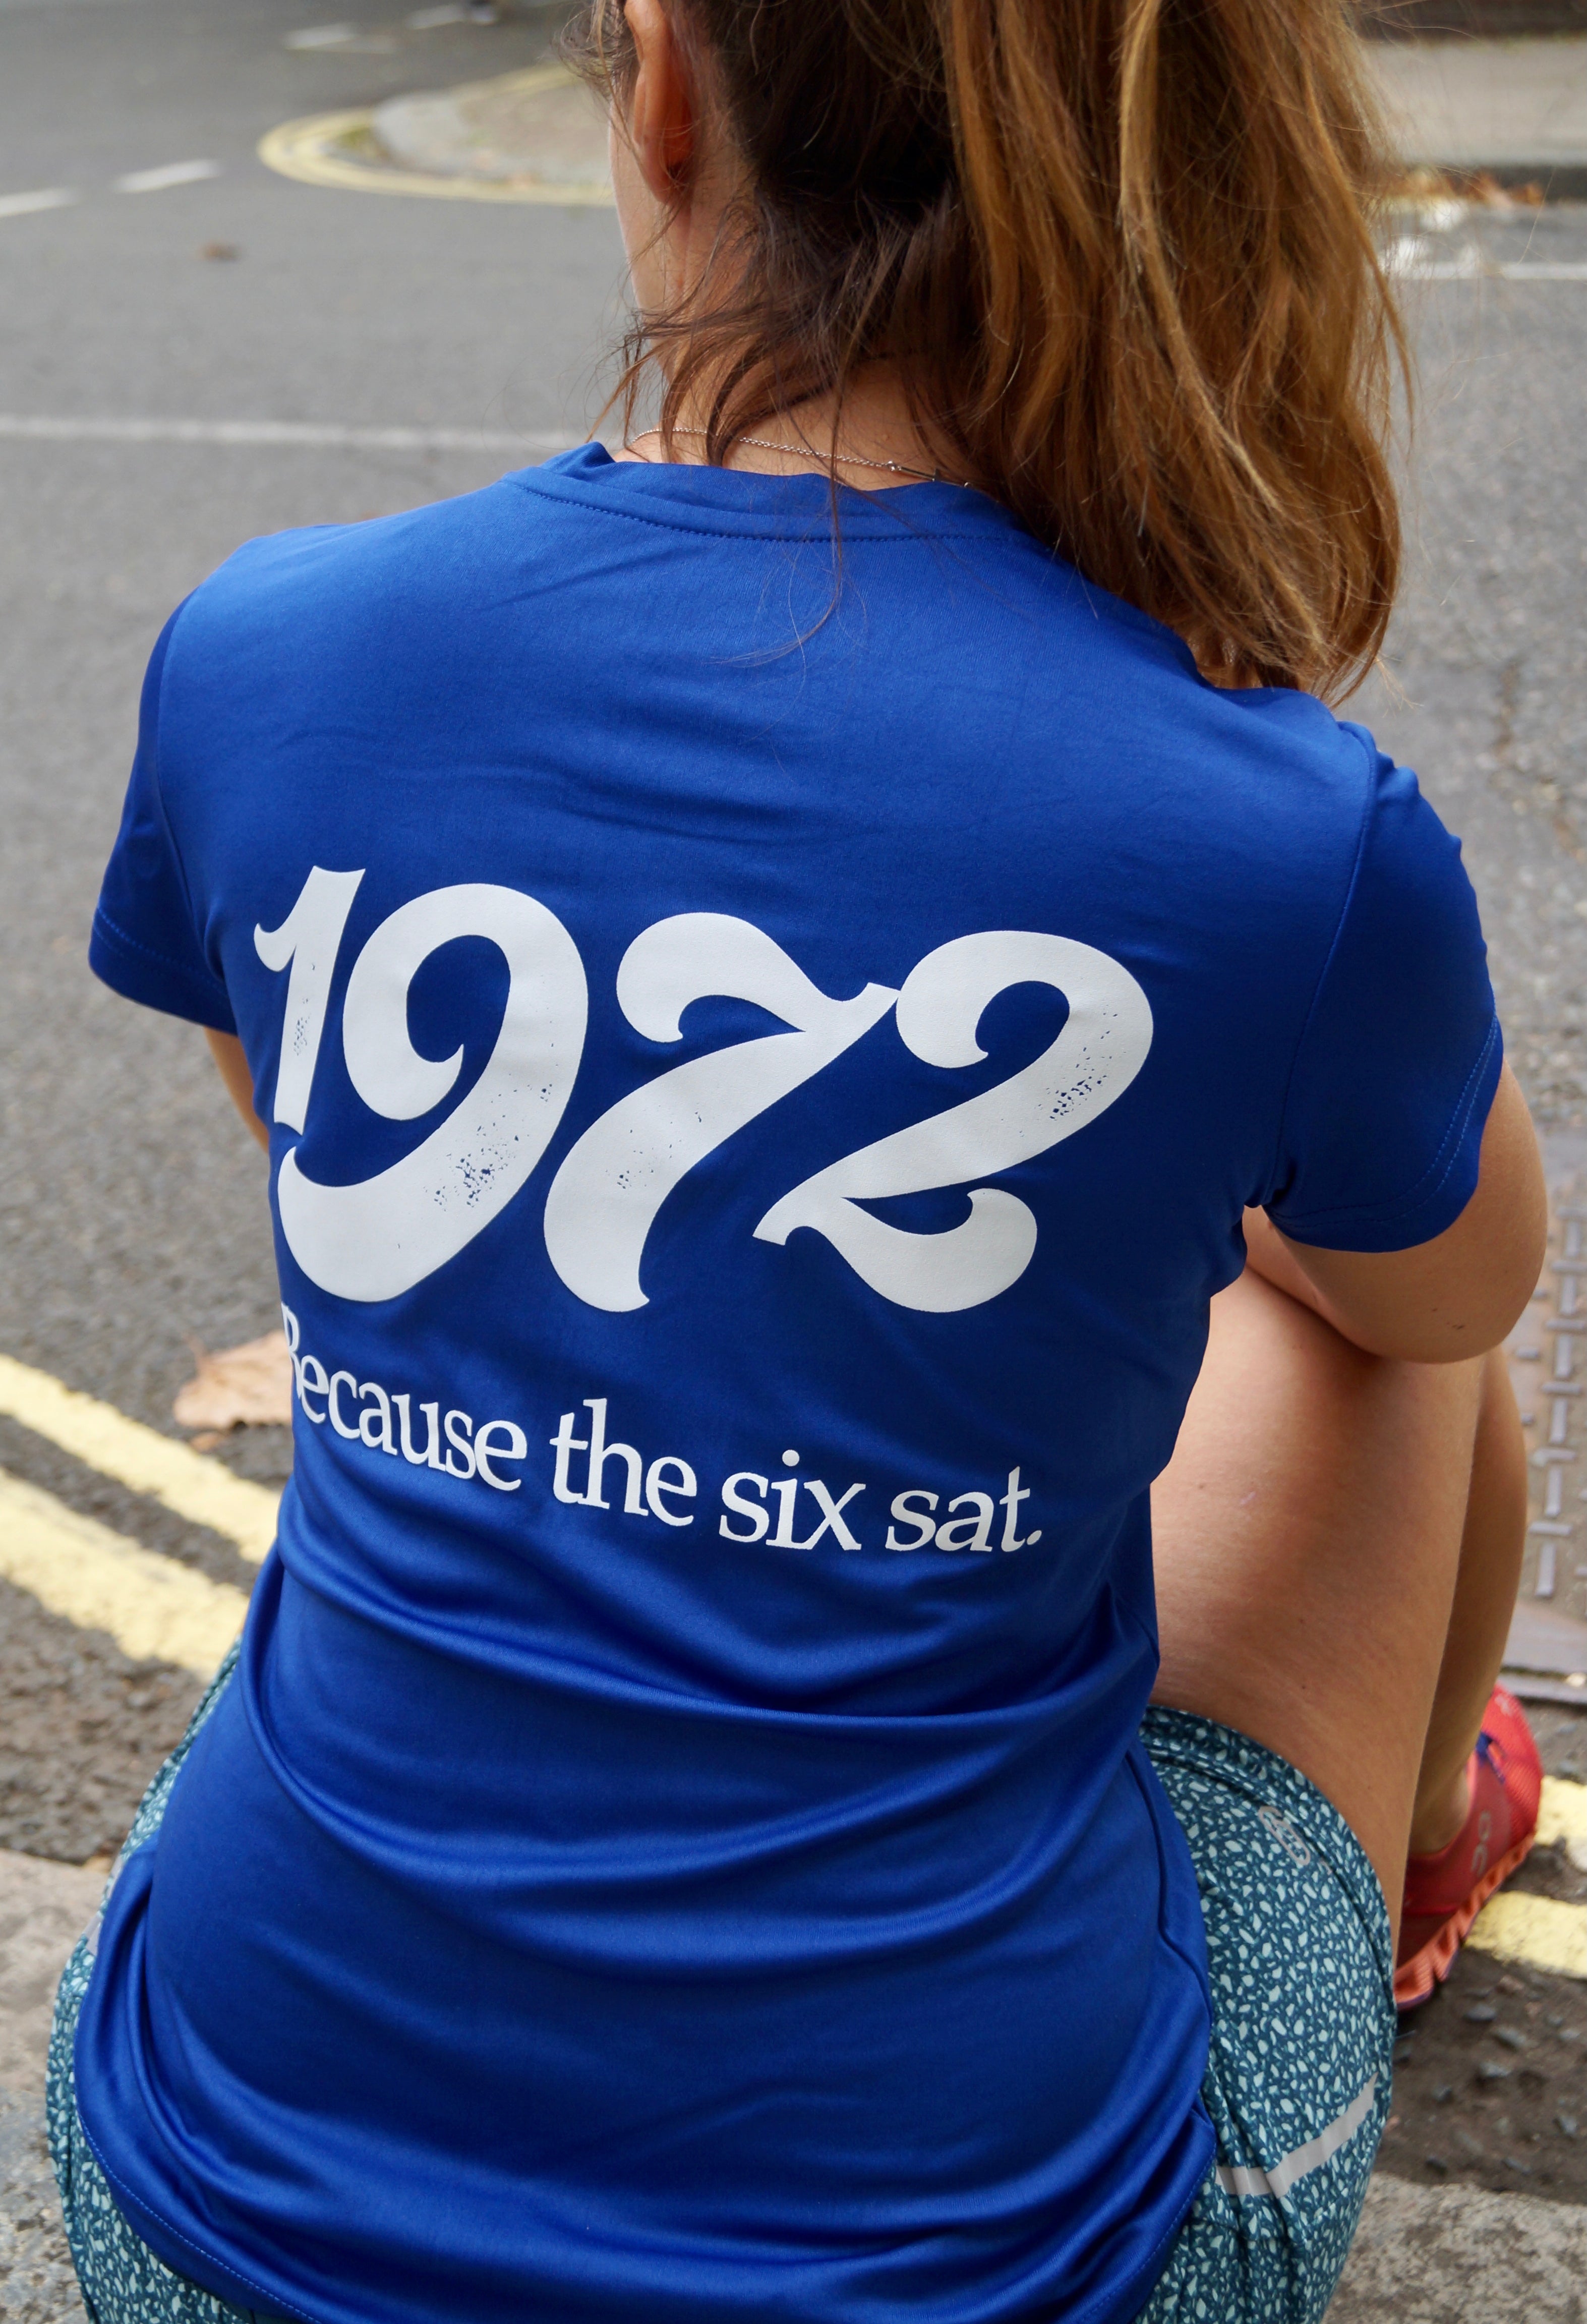 ‘Because the six sat’ Women’s Performance Tee